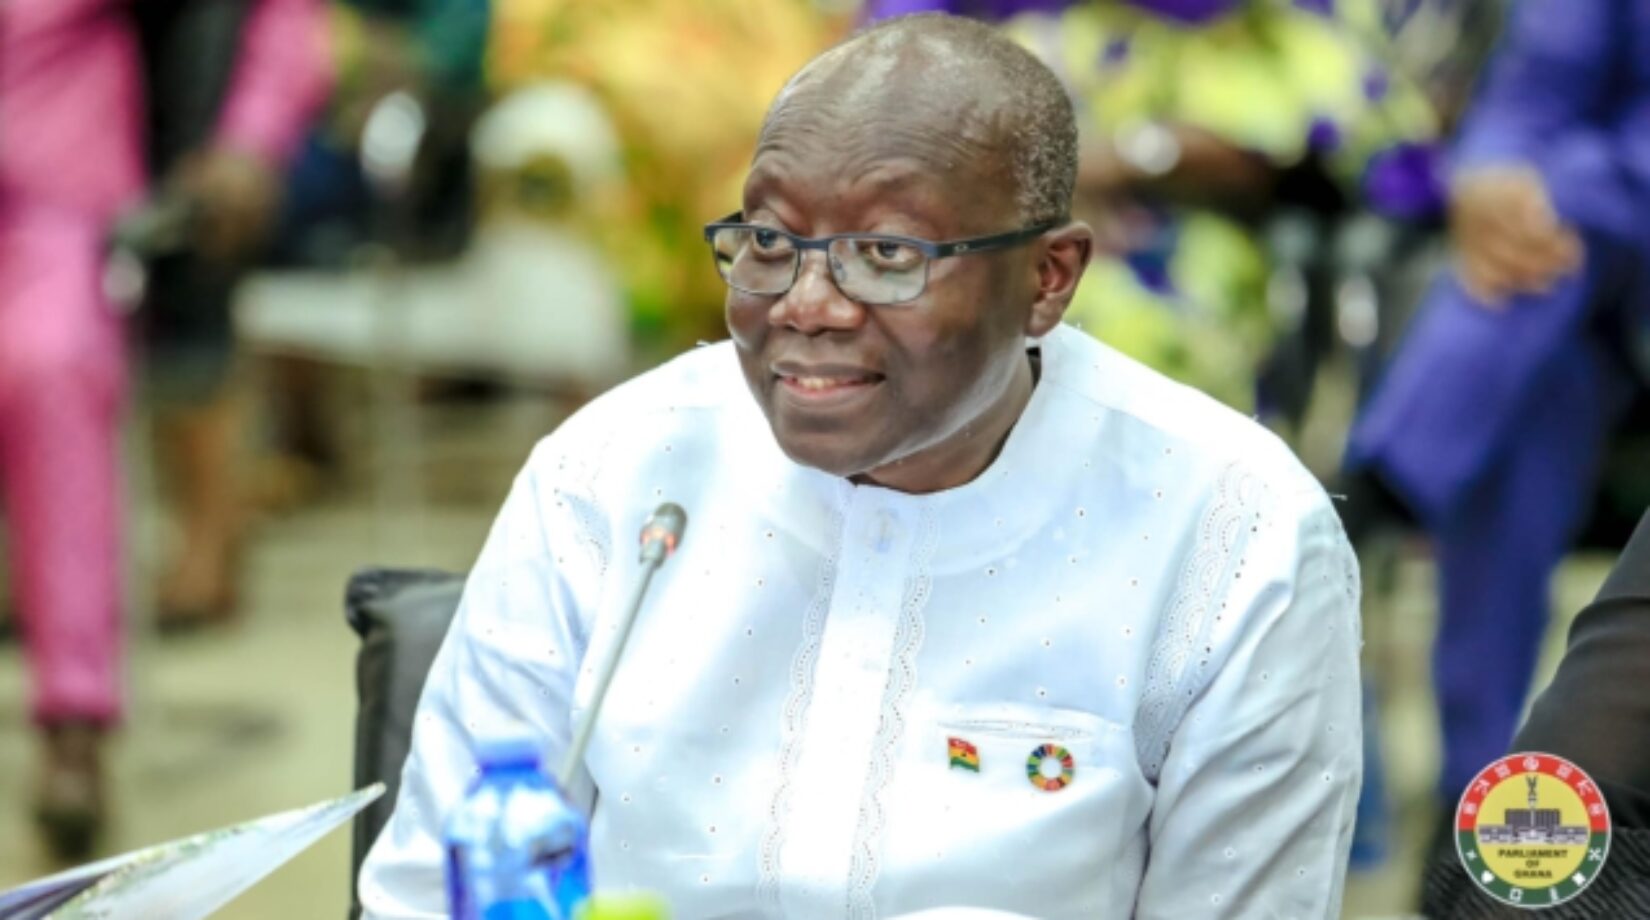 ANOTHER WAHALA: Pension bondholders deny receiving exemption letter from Ken Ofori-Atta